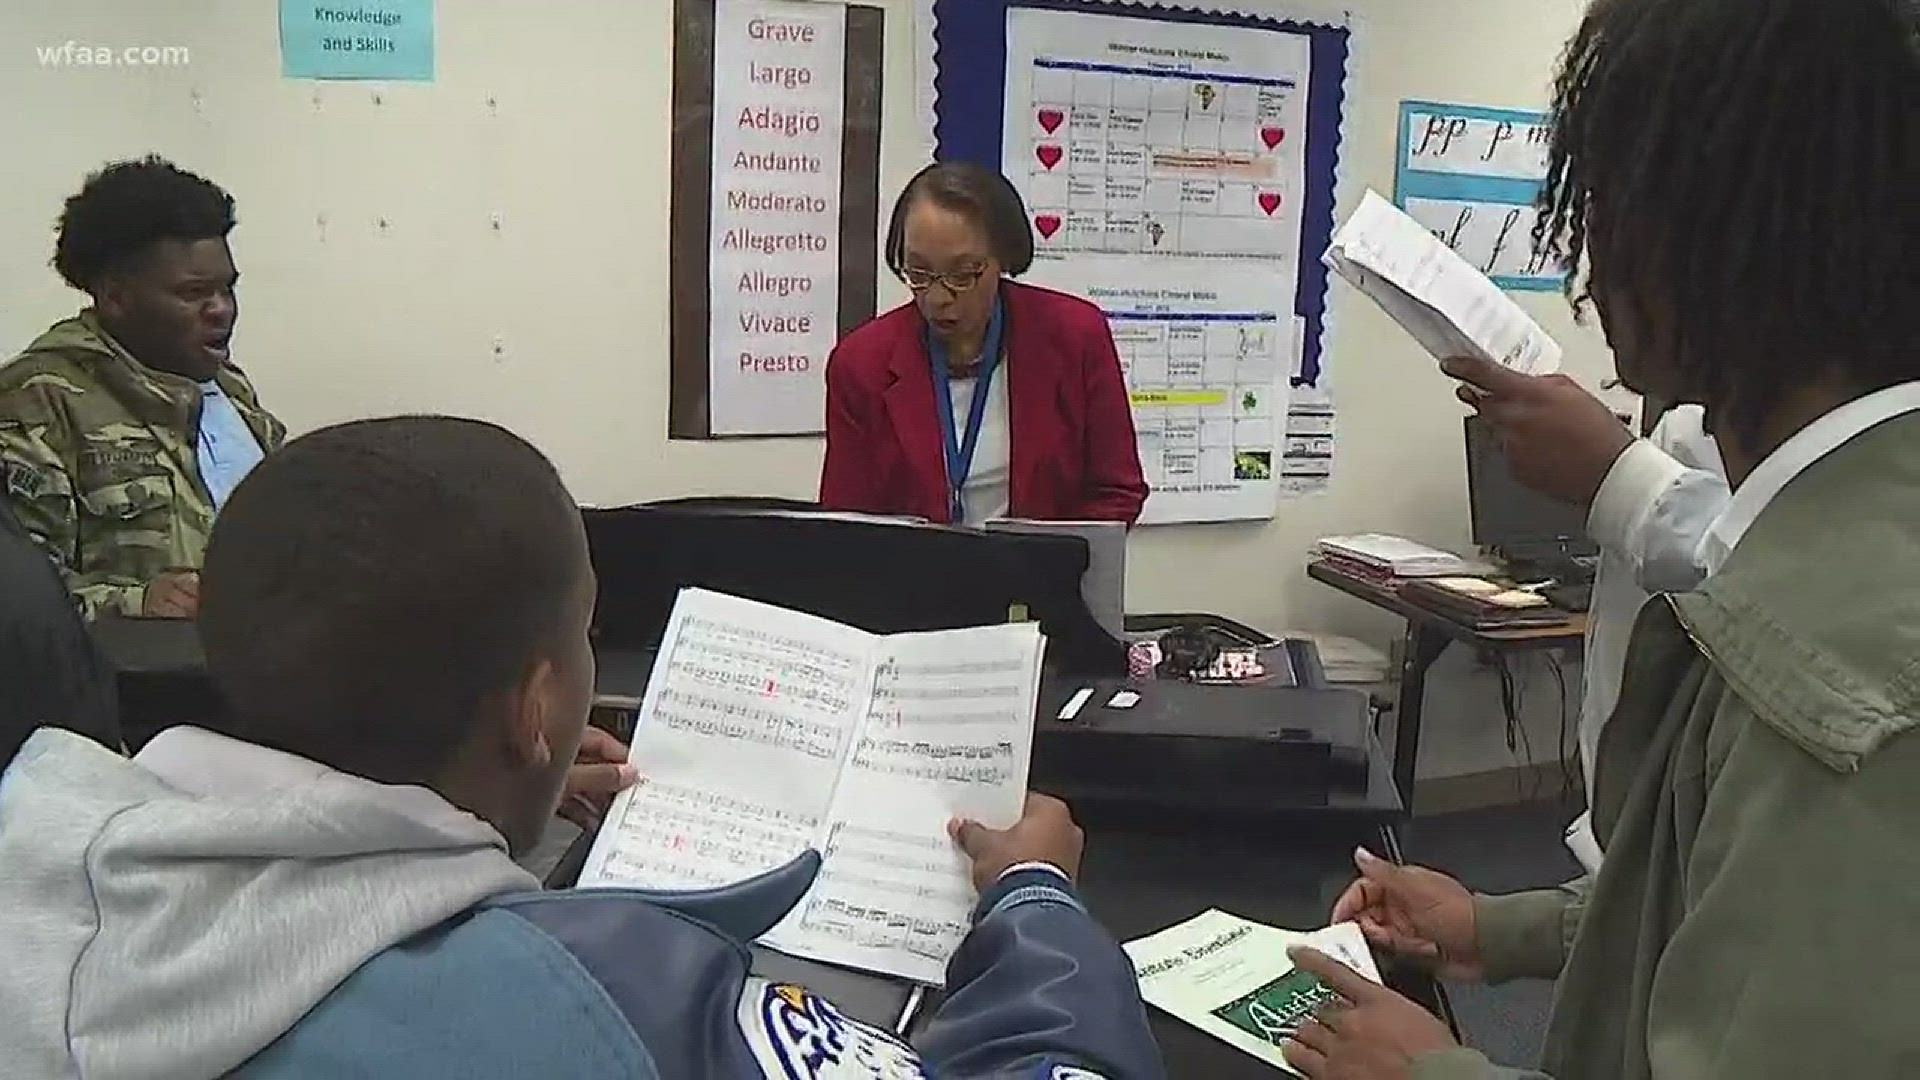 The Hutchins teacher uses music to teach students life lessons.